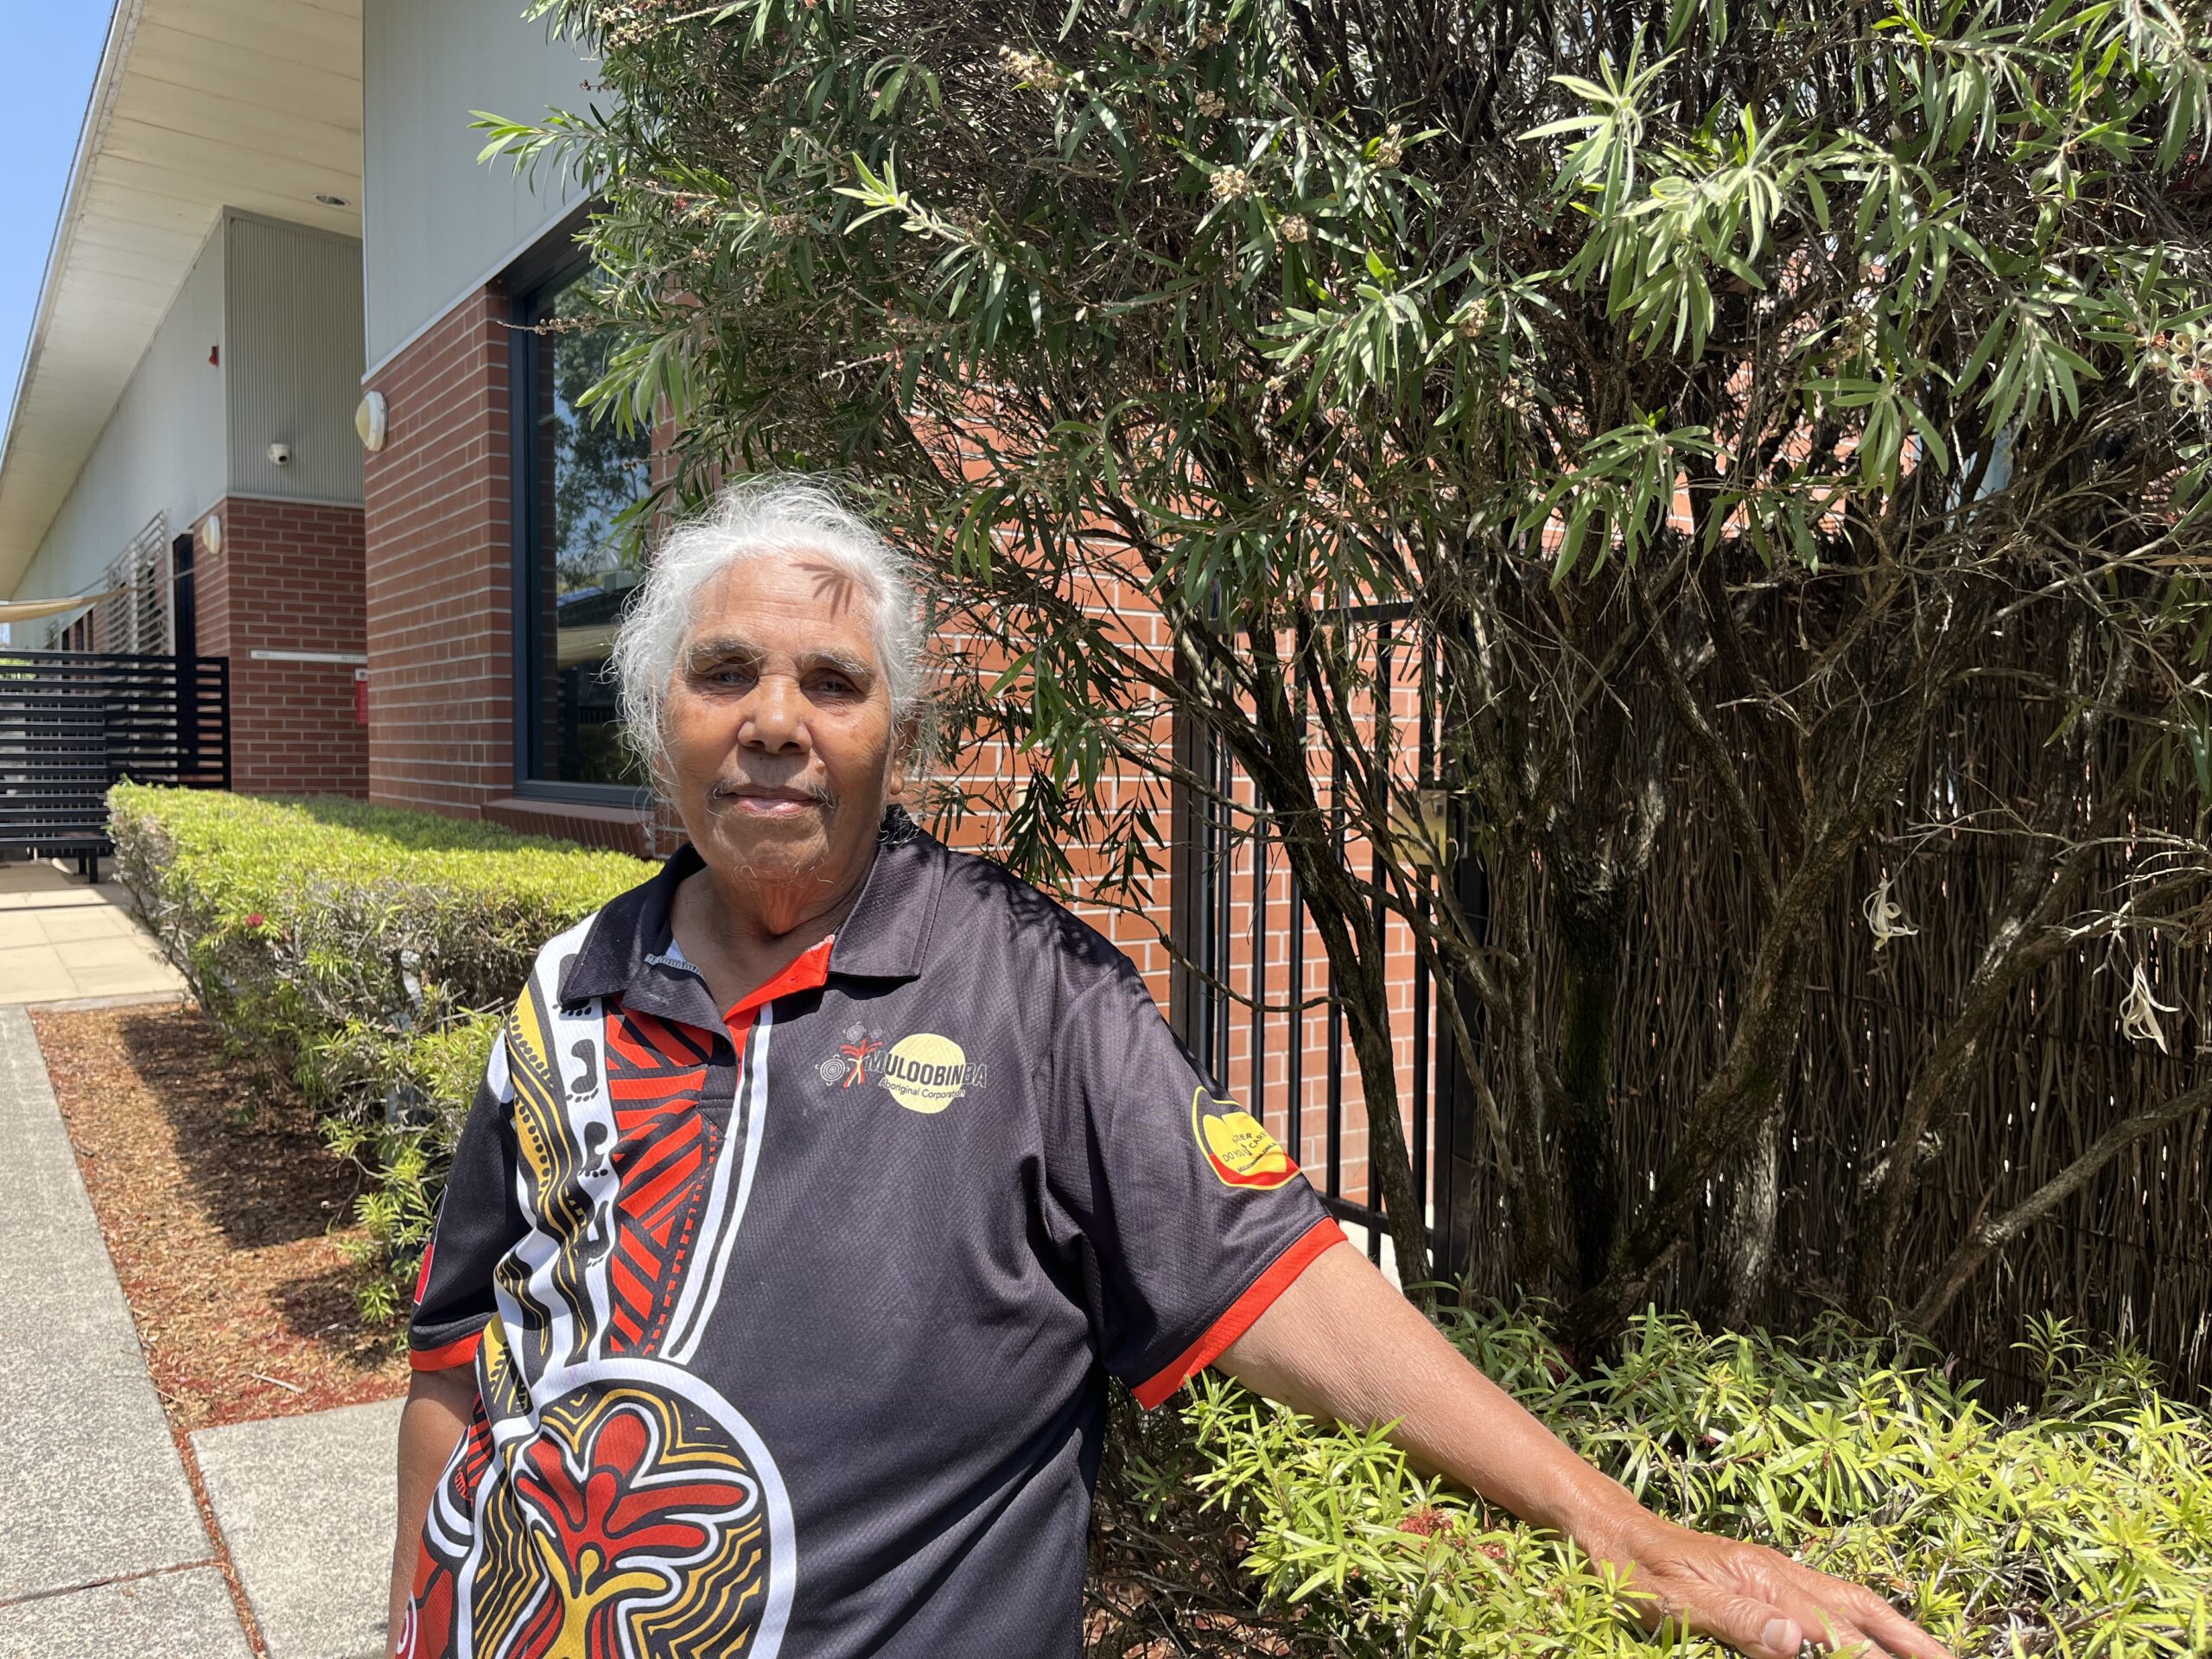 An elderly First Nations woman stands in a garden wearing a black shirt with red, yellow and white Aboriginal designs.